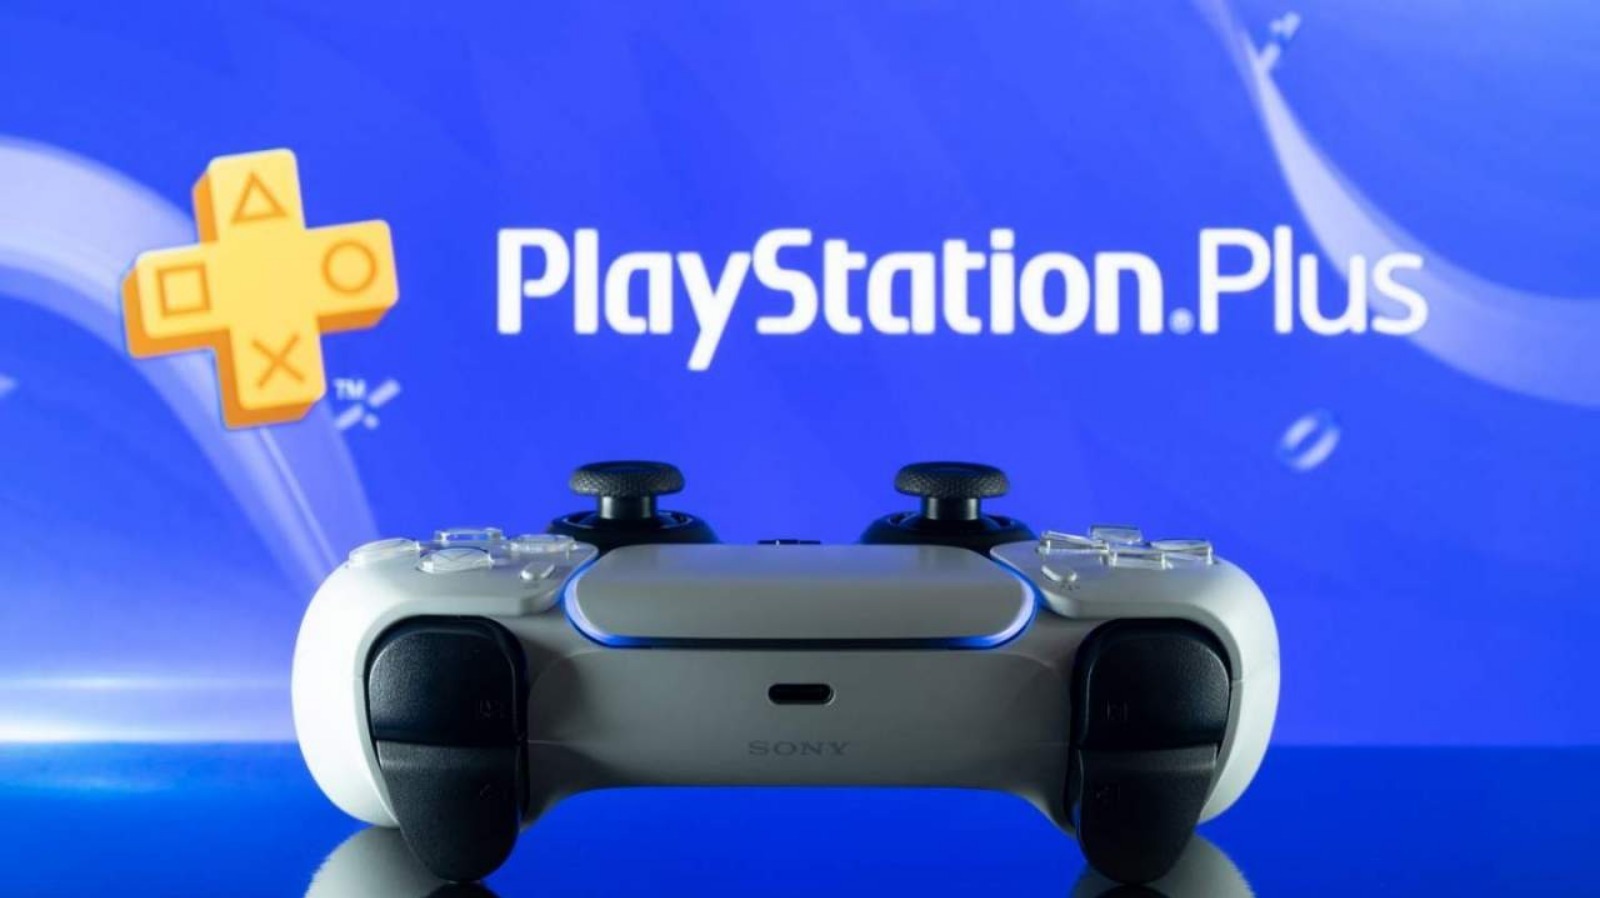 The new PlayStation Plus will bring cloud-based titles to PC